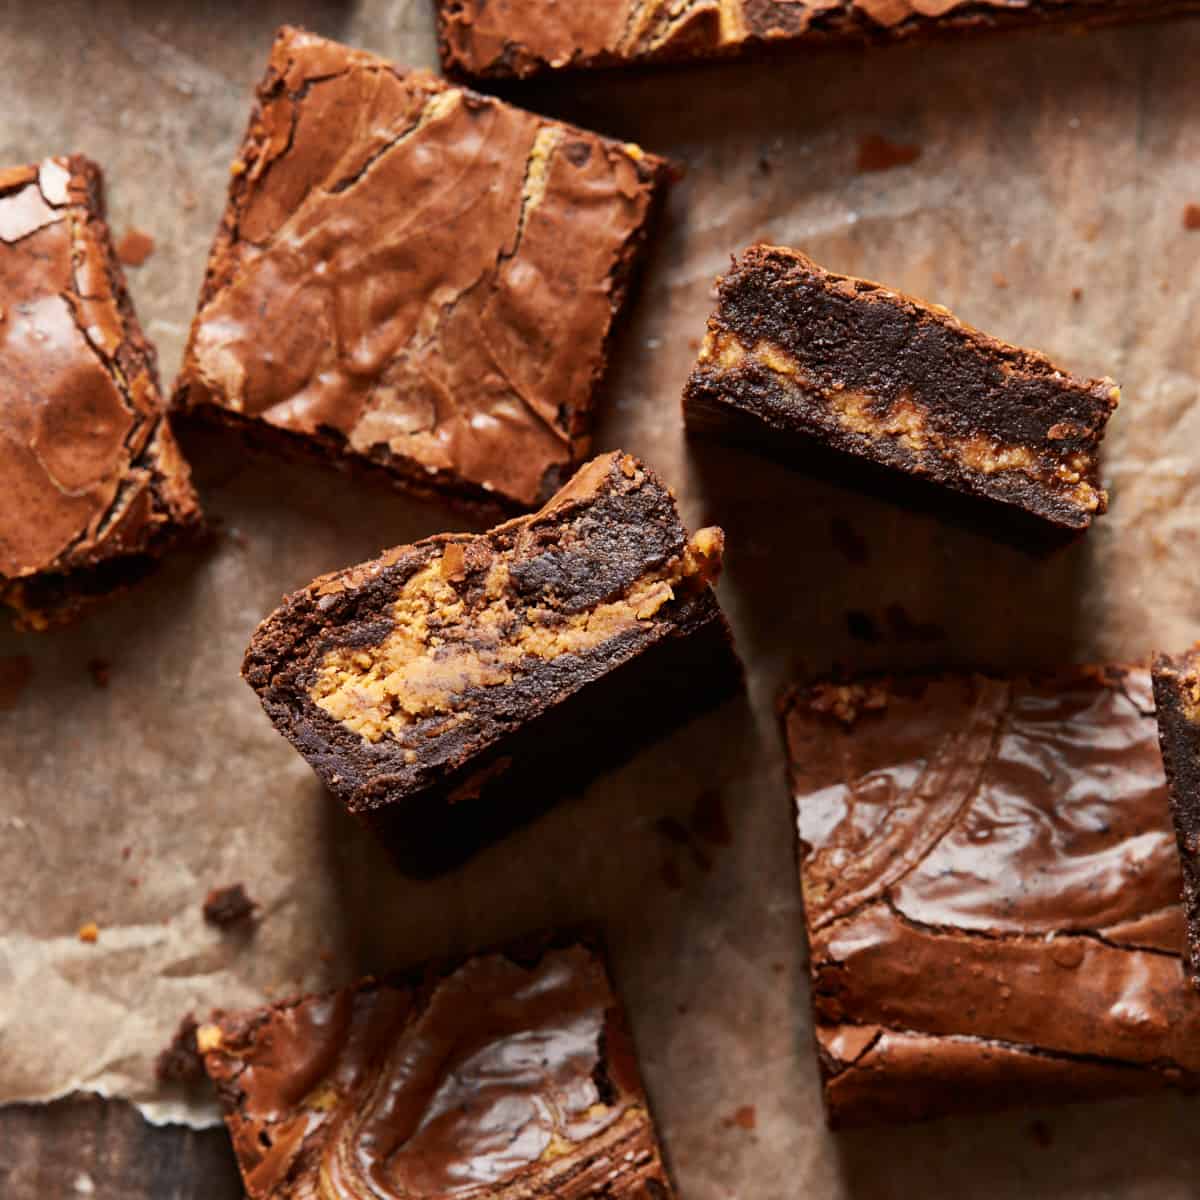 Slices of peanut butter brownies on parchment paper